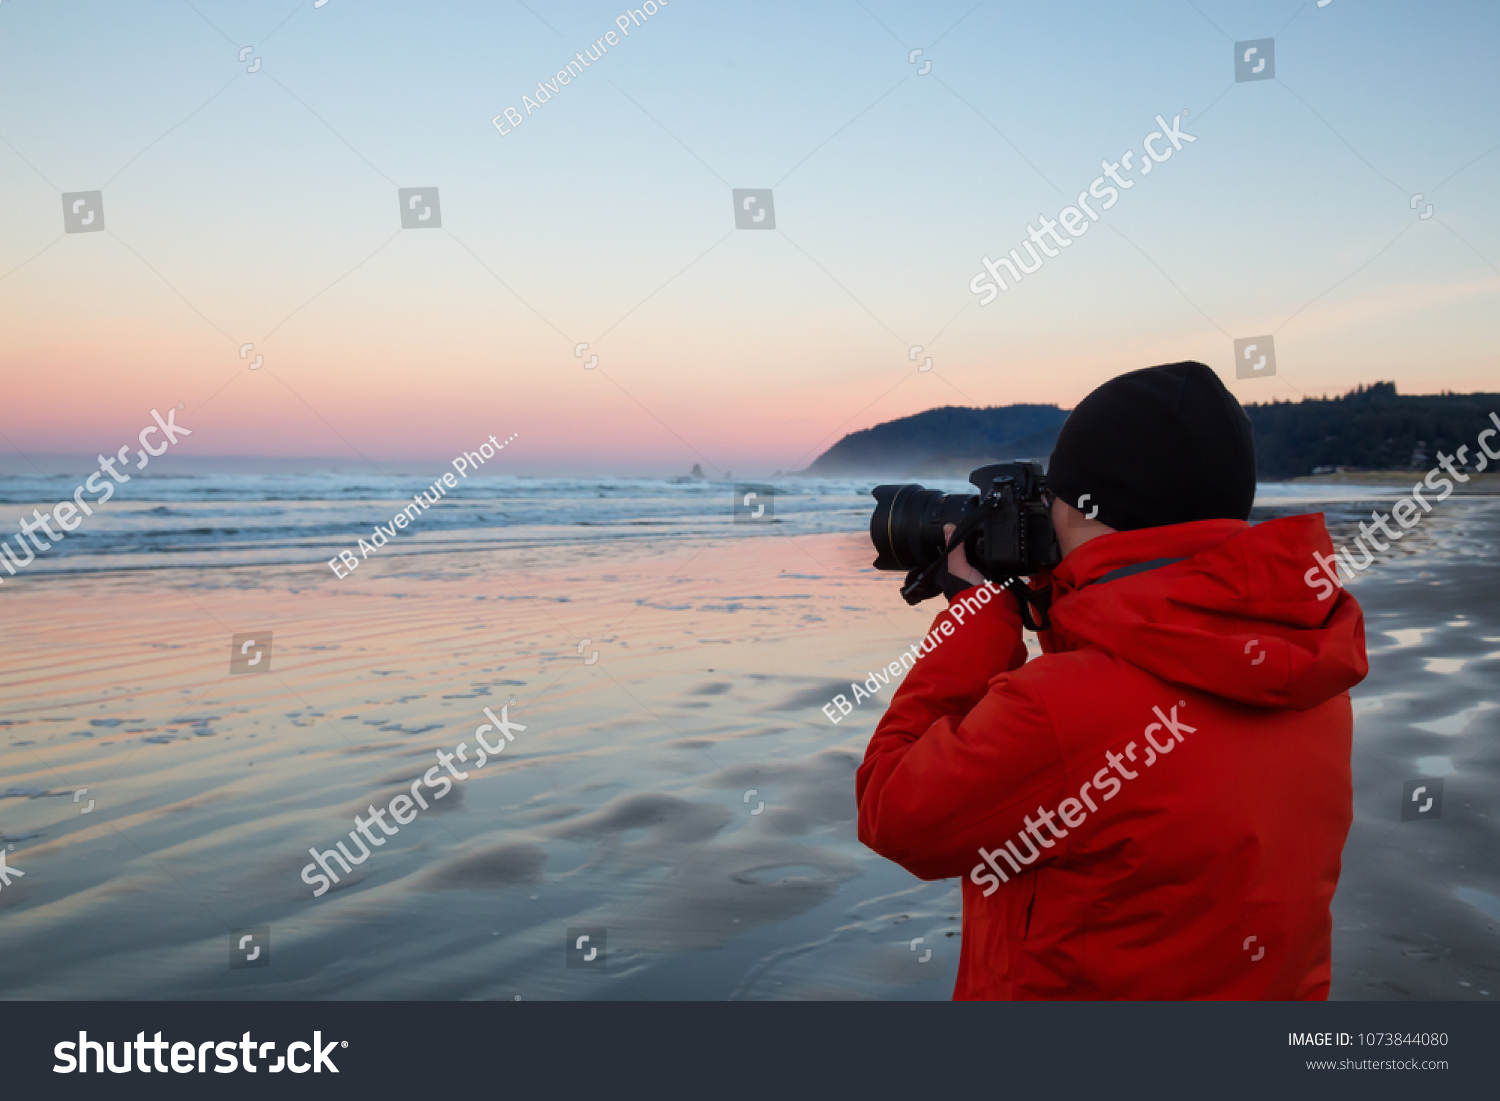 Photographer with a camera is standing on the sandy beach during a vibrant and colorful winter sunrise. Taken in Canon Beach, Oregon Coast, United States of America. #1073844080